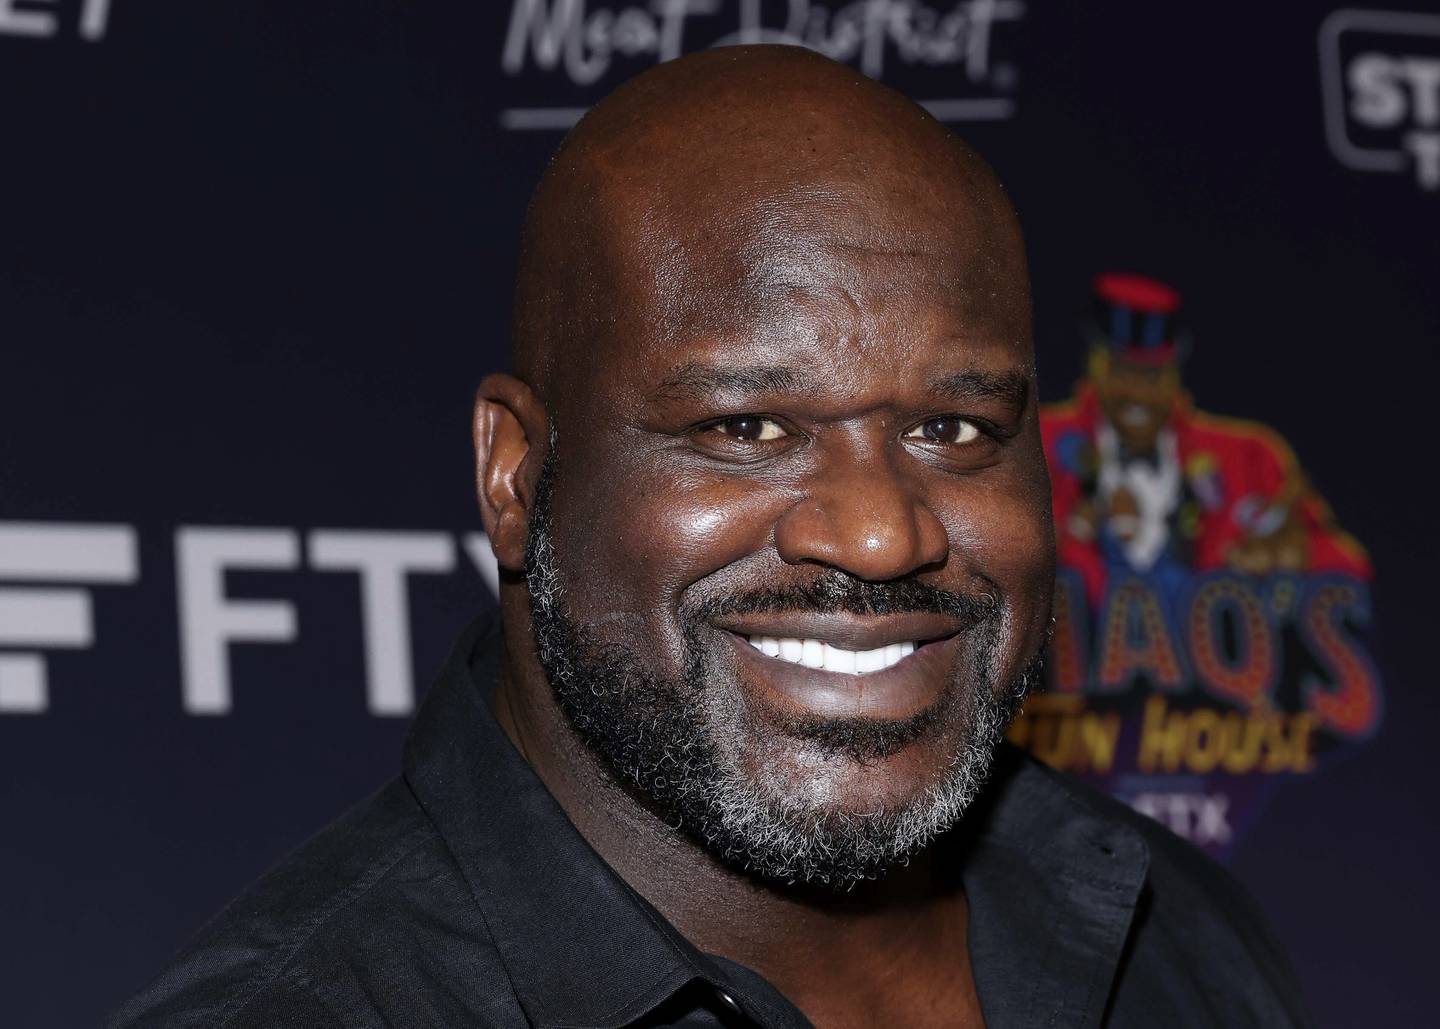 Shaquille O'Neal, 50, has a net worth estimated at $400 million, according to Celebrity Net Worth. AP